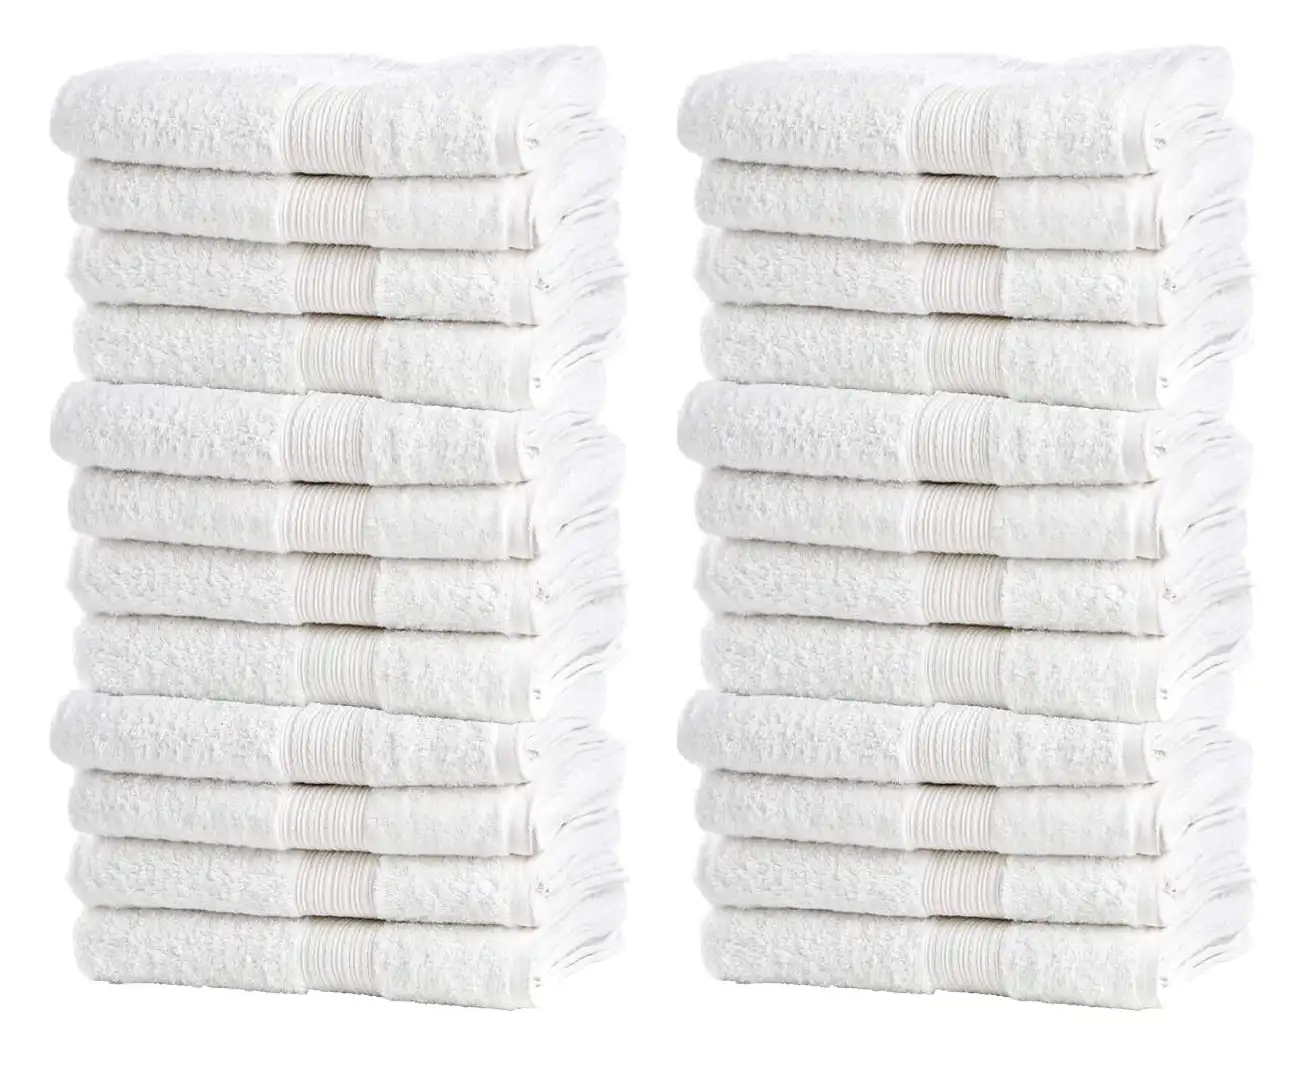 

Bulk Spa White Wash Cloths 24 Pk - 12” x 12” – Thick Loop Pile Face Towels and Washcloths